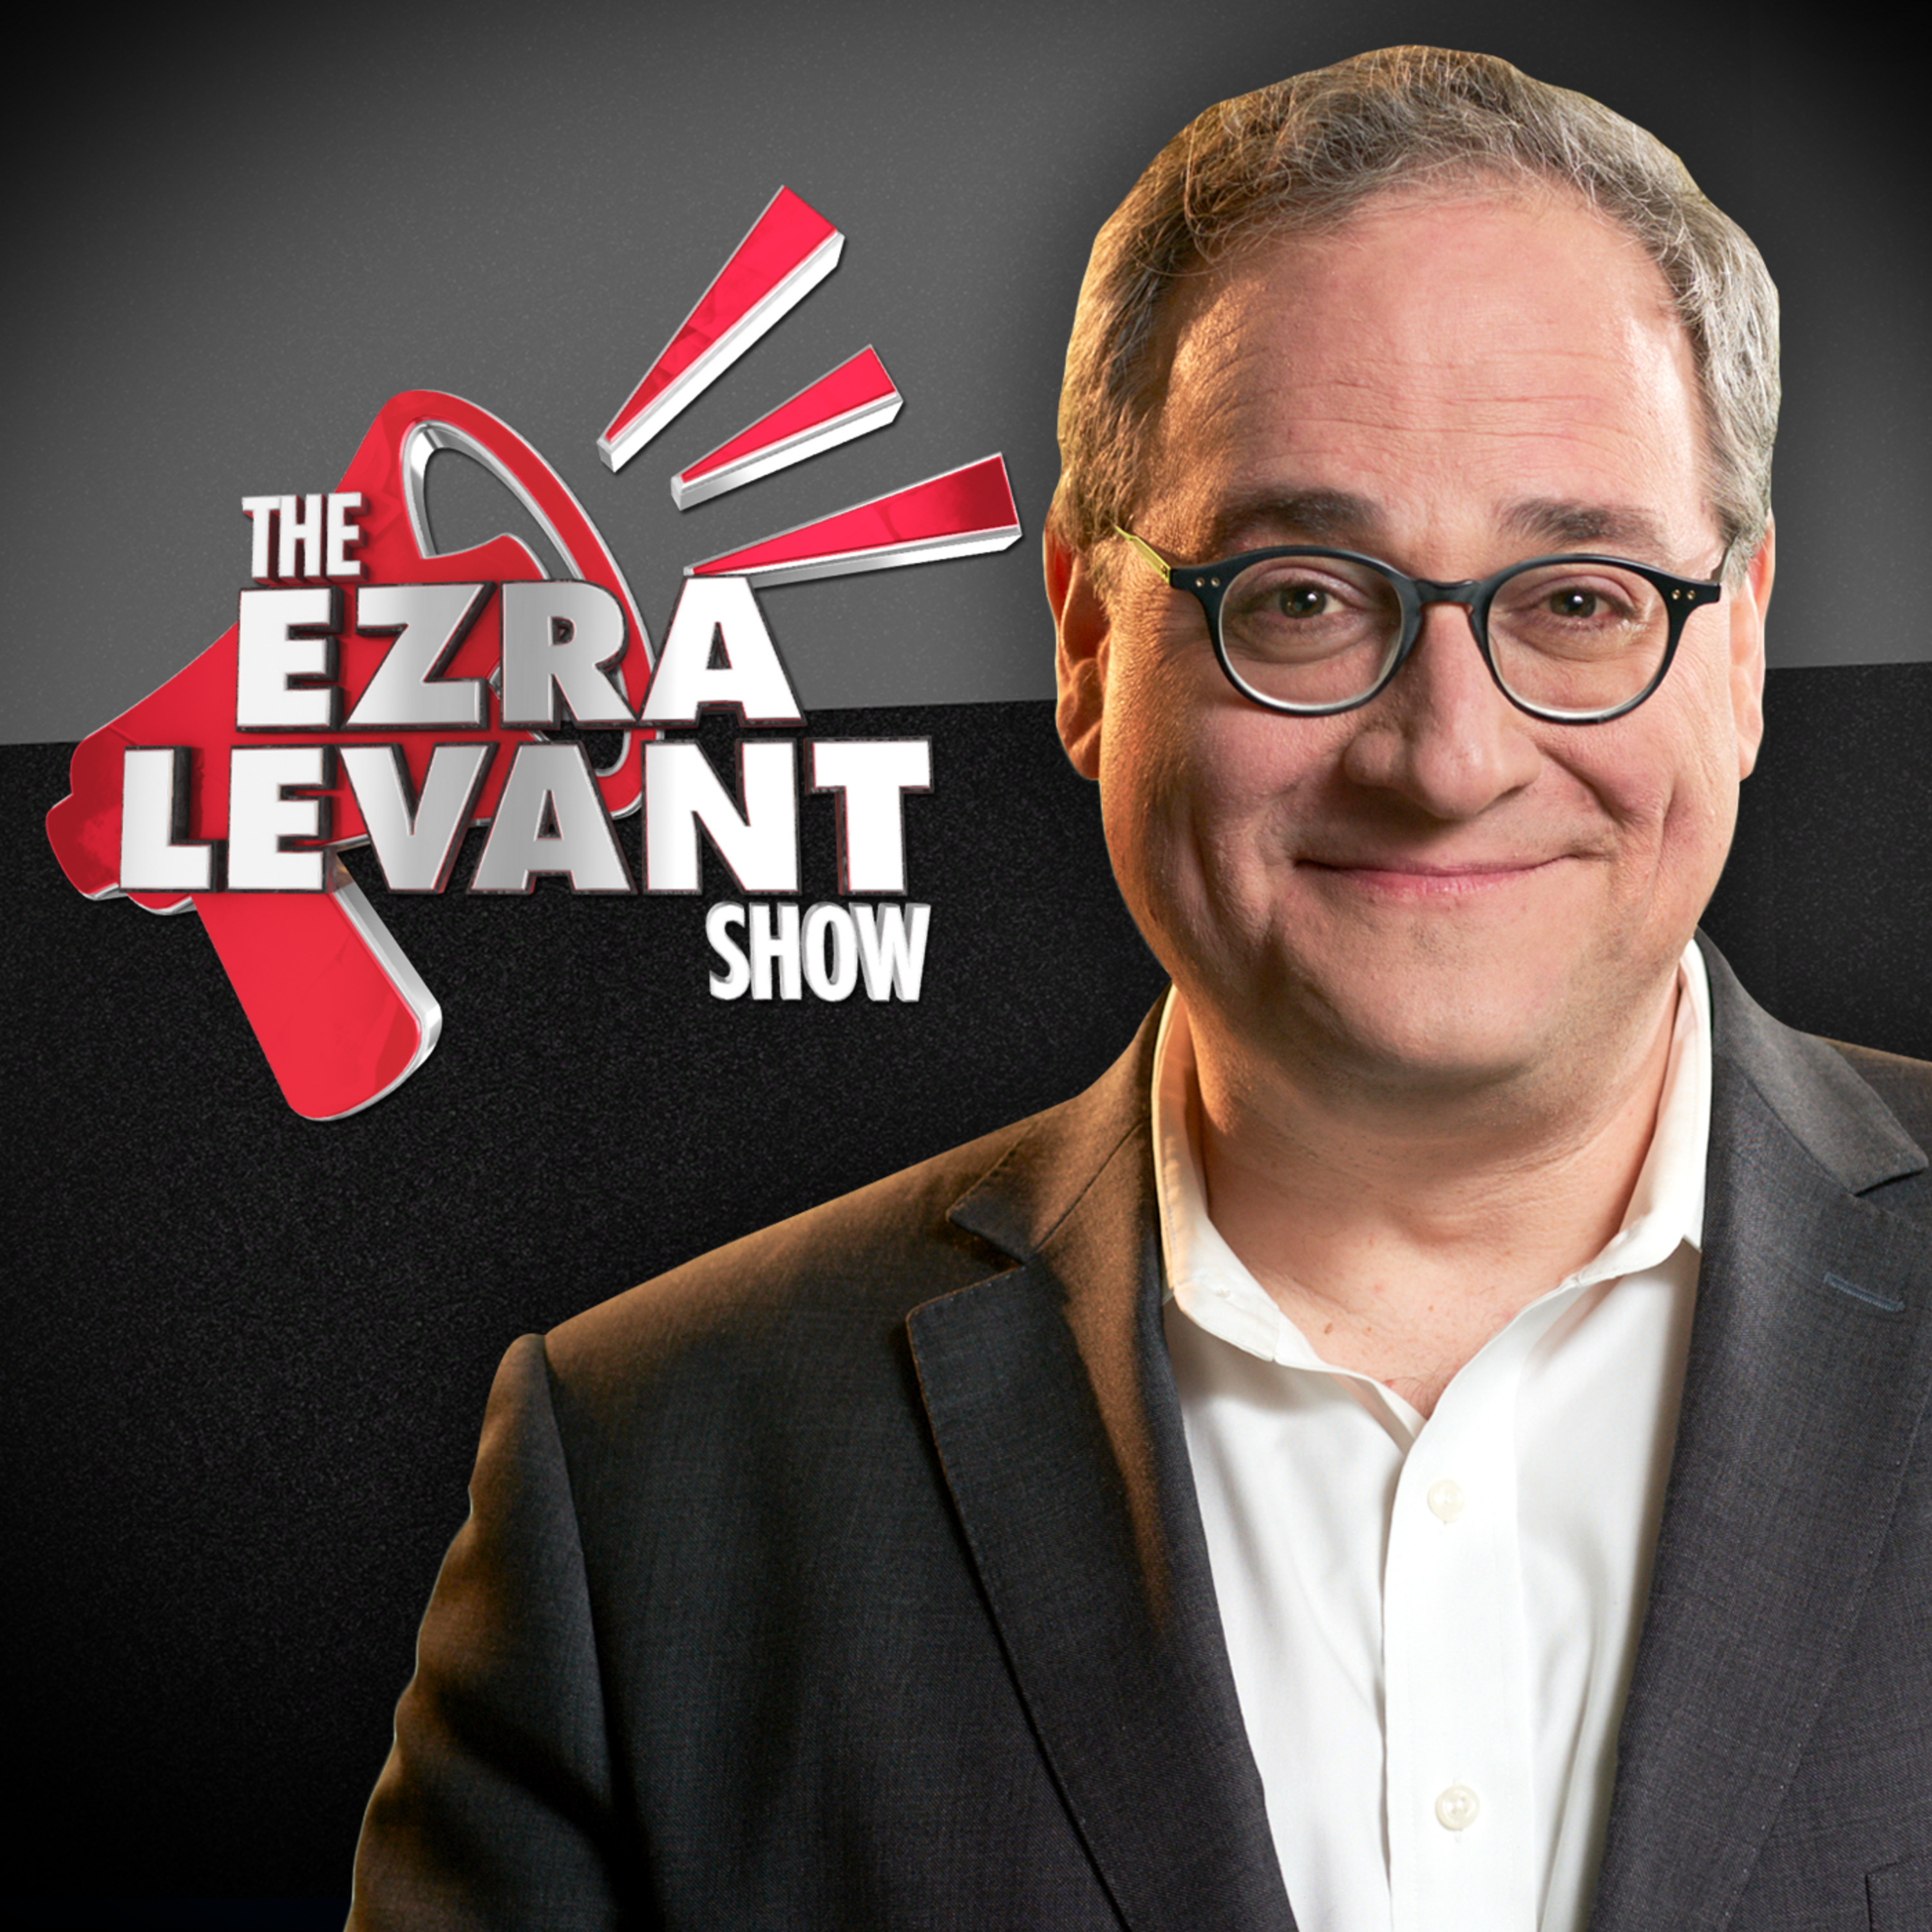 EZRA LEVANT | The liberal meltdown over Trump's Twitter return is incredible ... and he hasn't even tweeted yet!